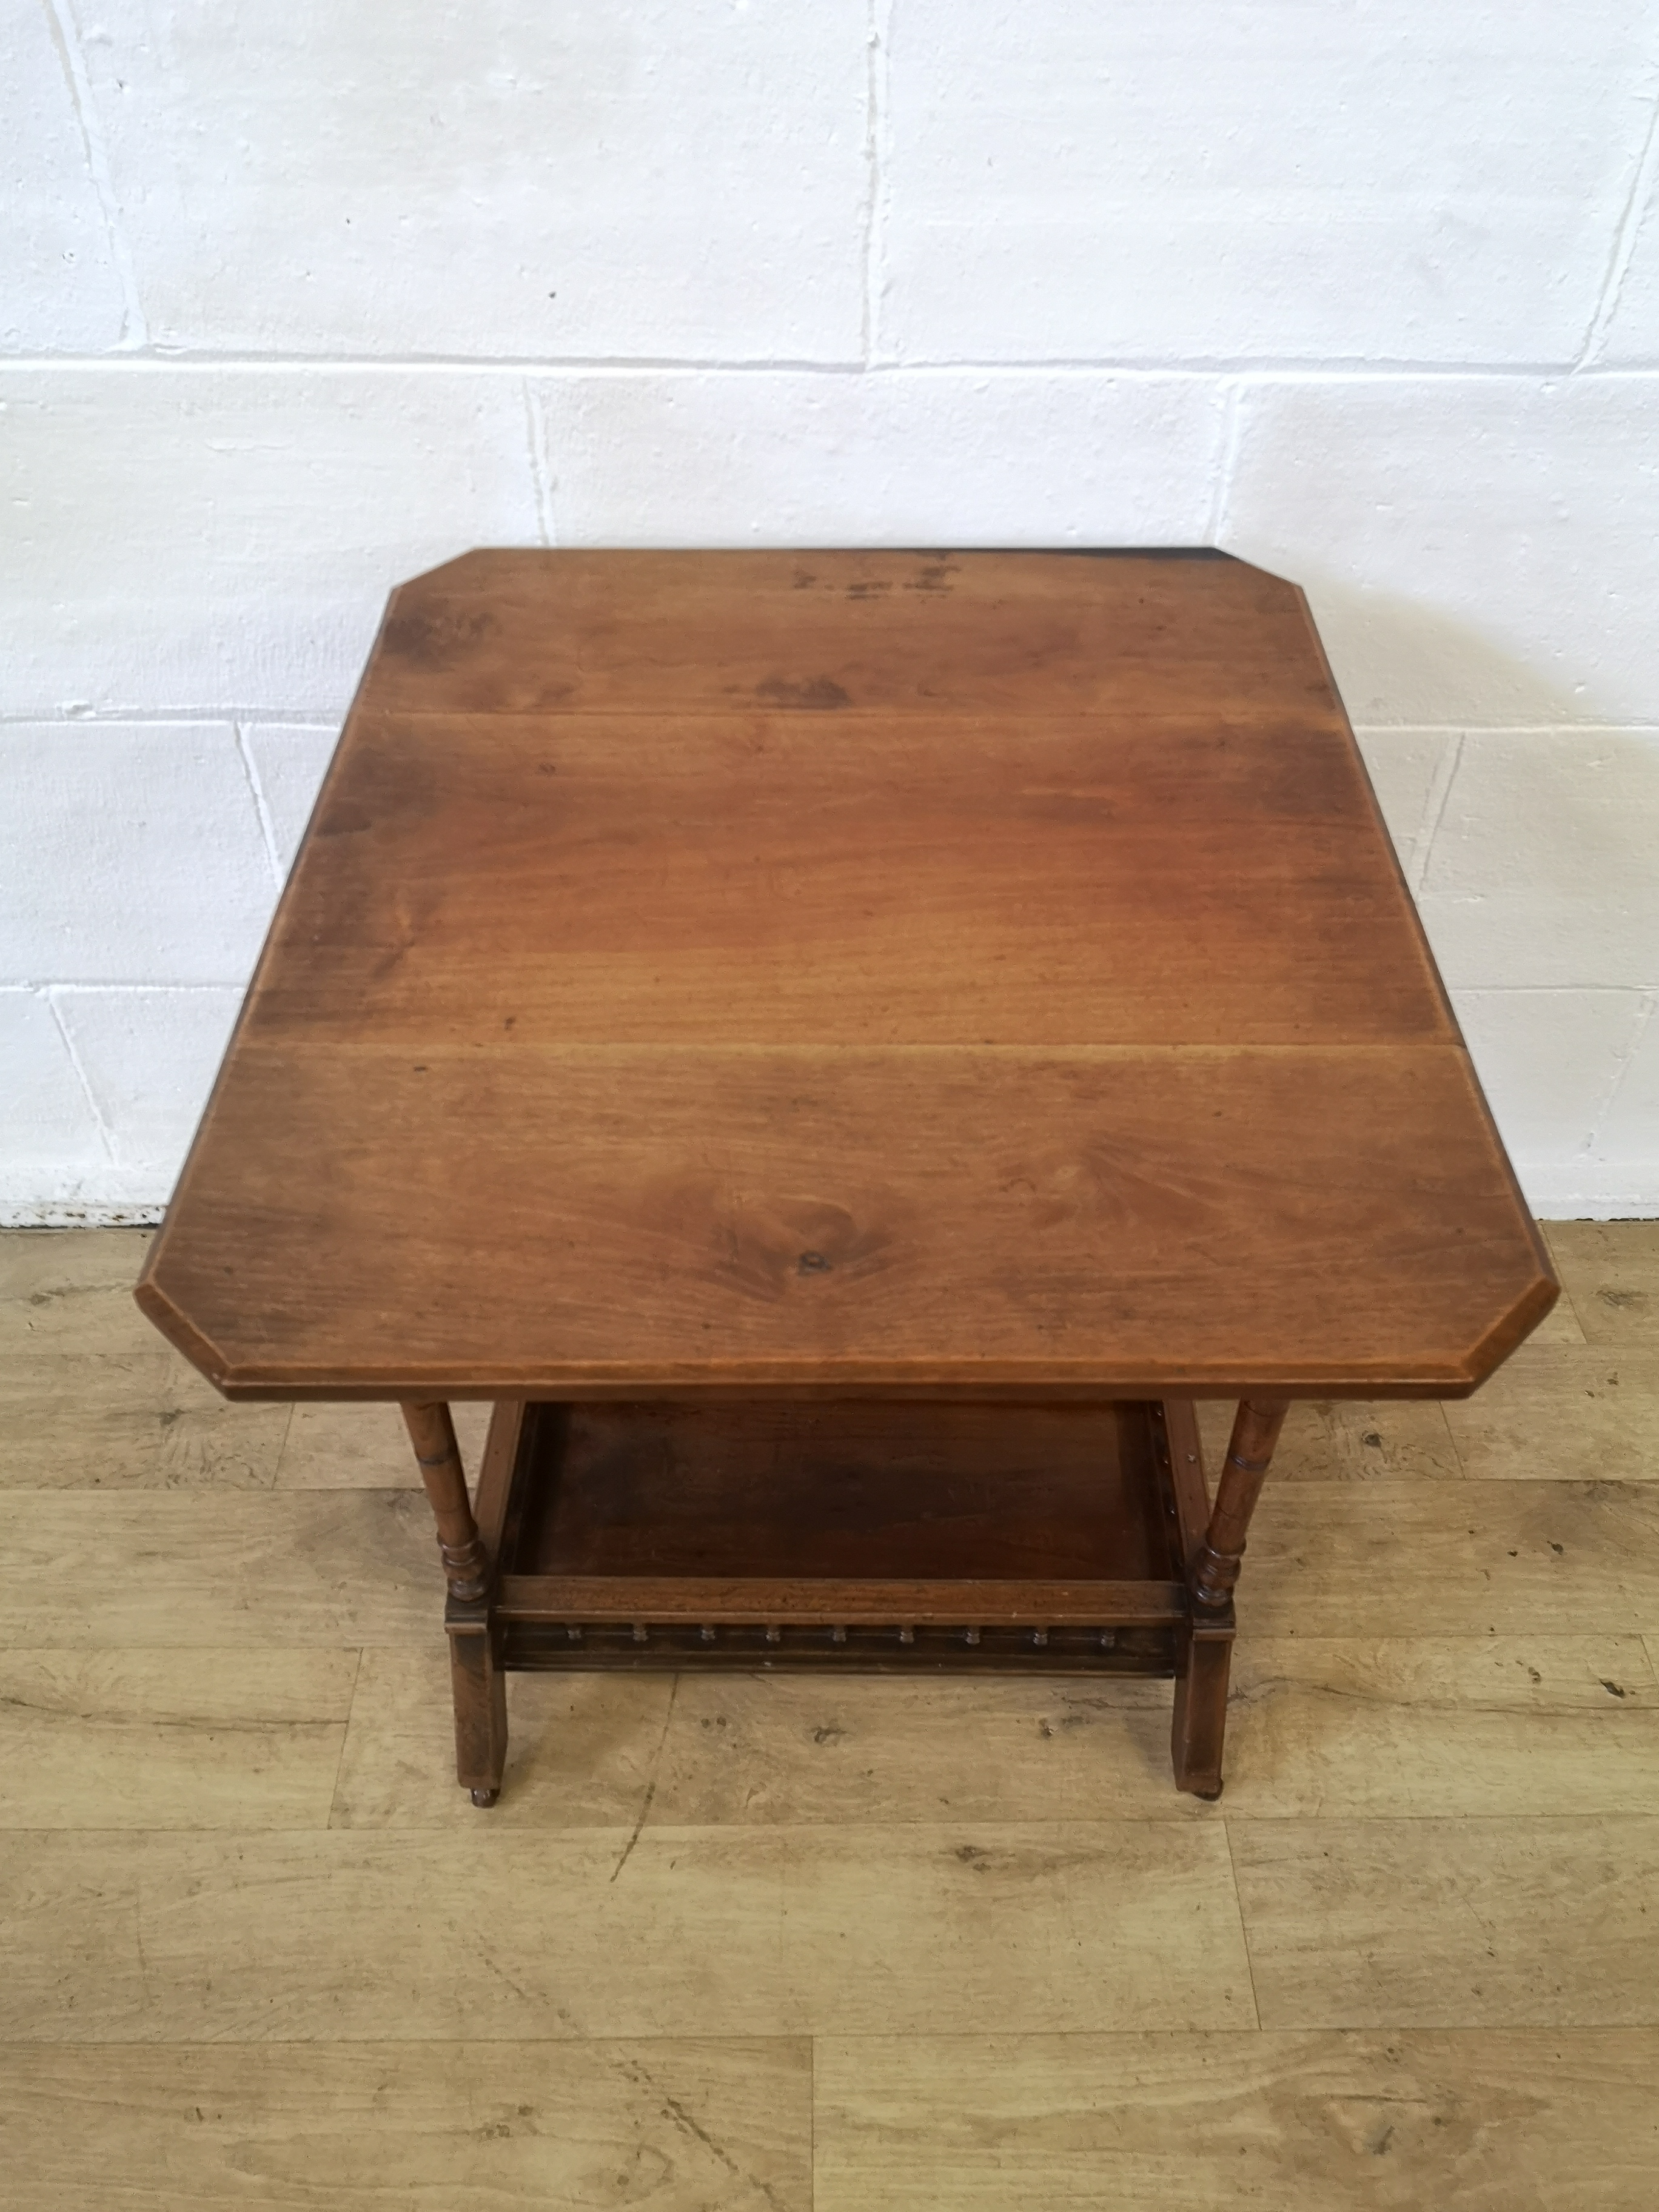 Mahogany drop leaf side table with canted corners - Image 3 of 7